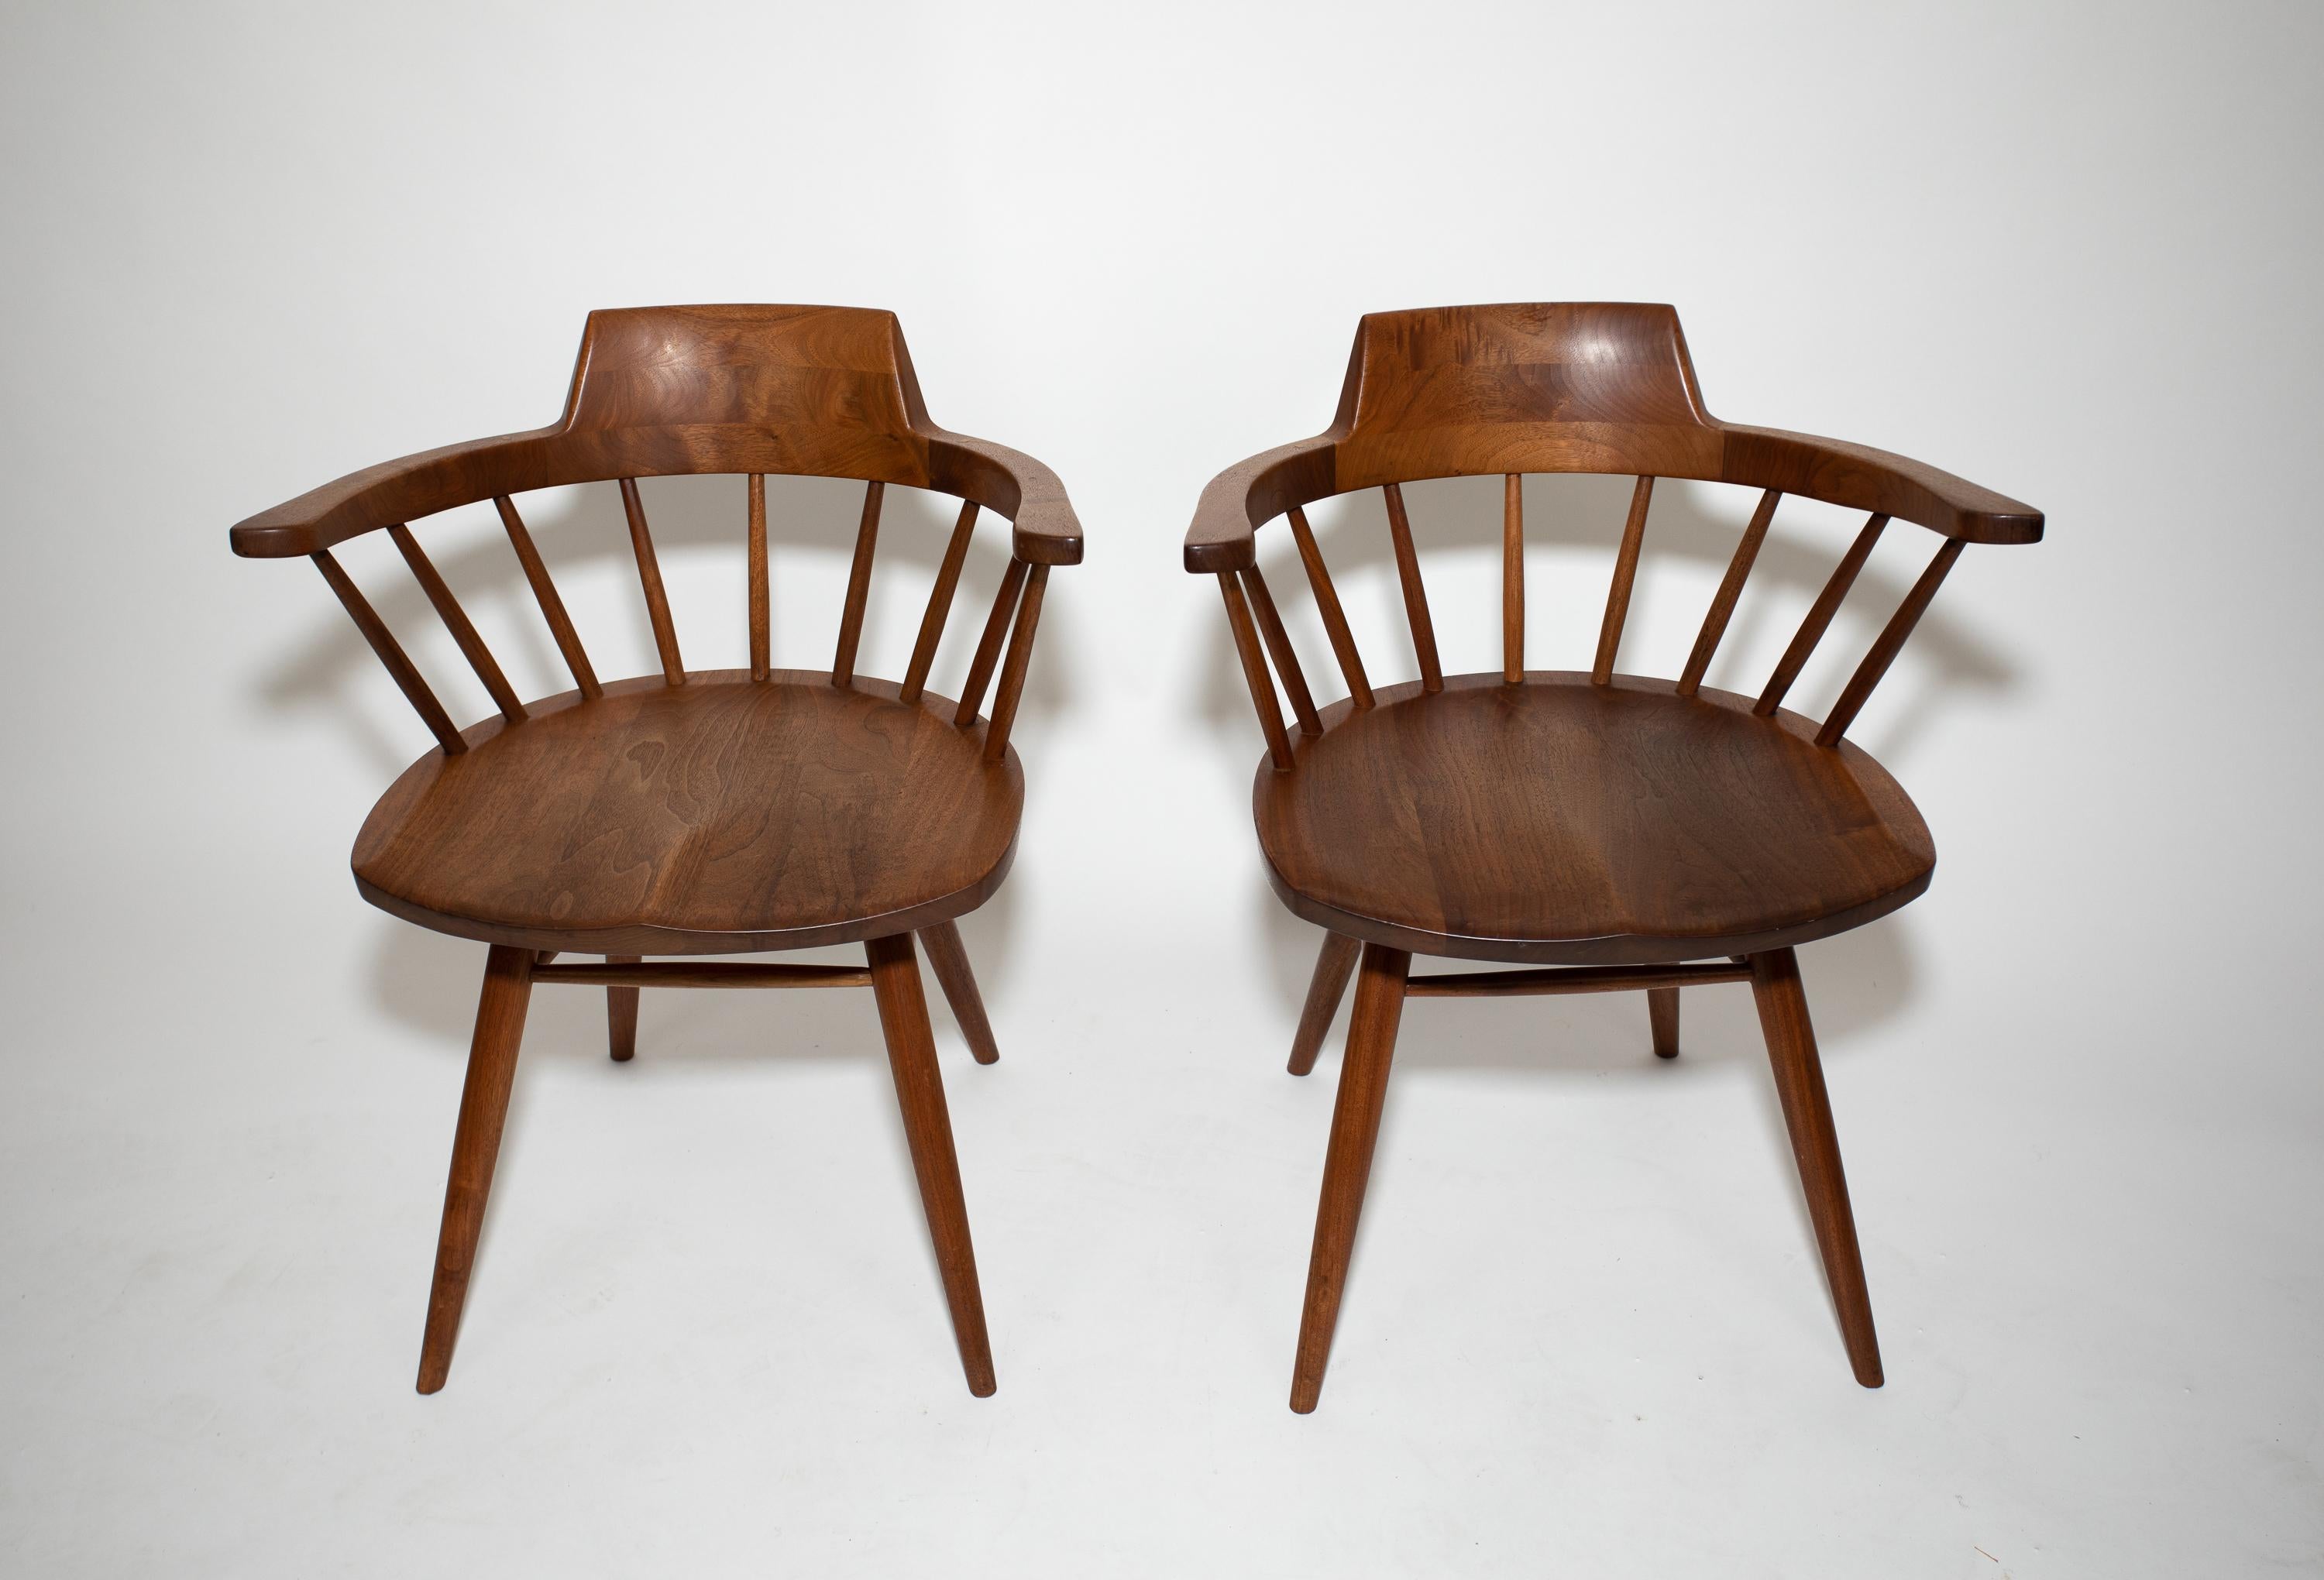 A pair of George Nakashima Chairs.
Beautiful original finish.
Original clients name on underside of the seat.
Elegant details include splines on the back and top of arms.
Nice wood selection.